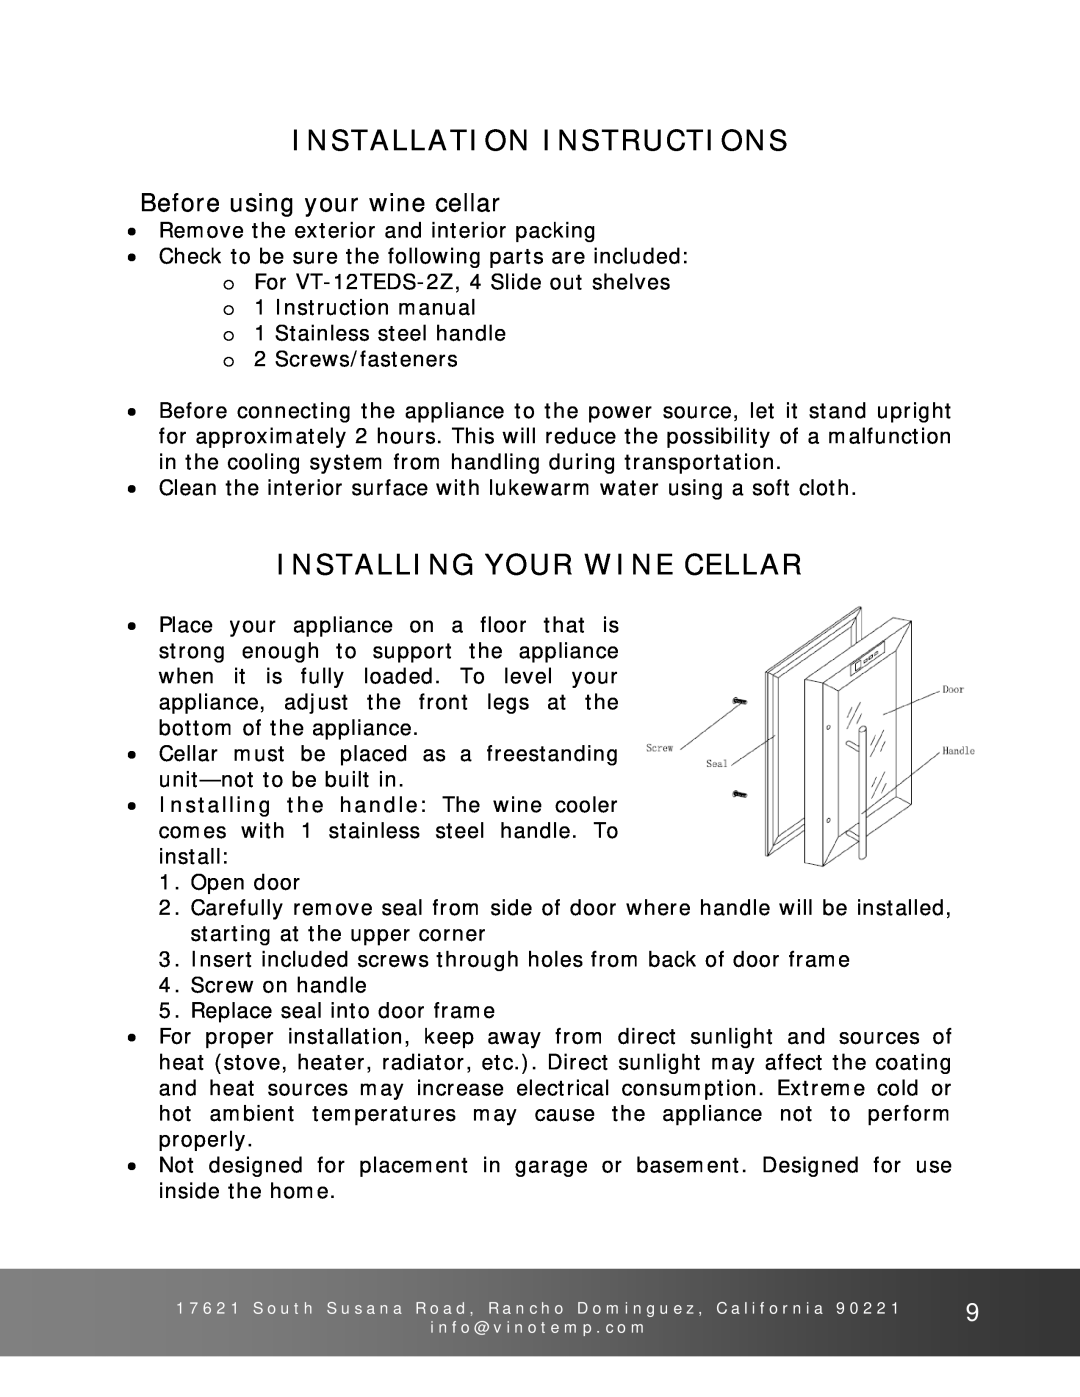 Vinotemp VT12TEDS2Z owner manual Installation Instructions, Installing Your Wine Cellar, Before using your wine cellar 